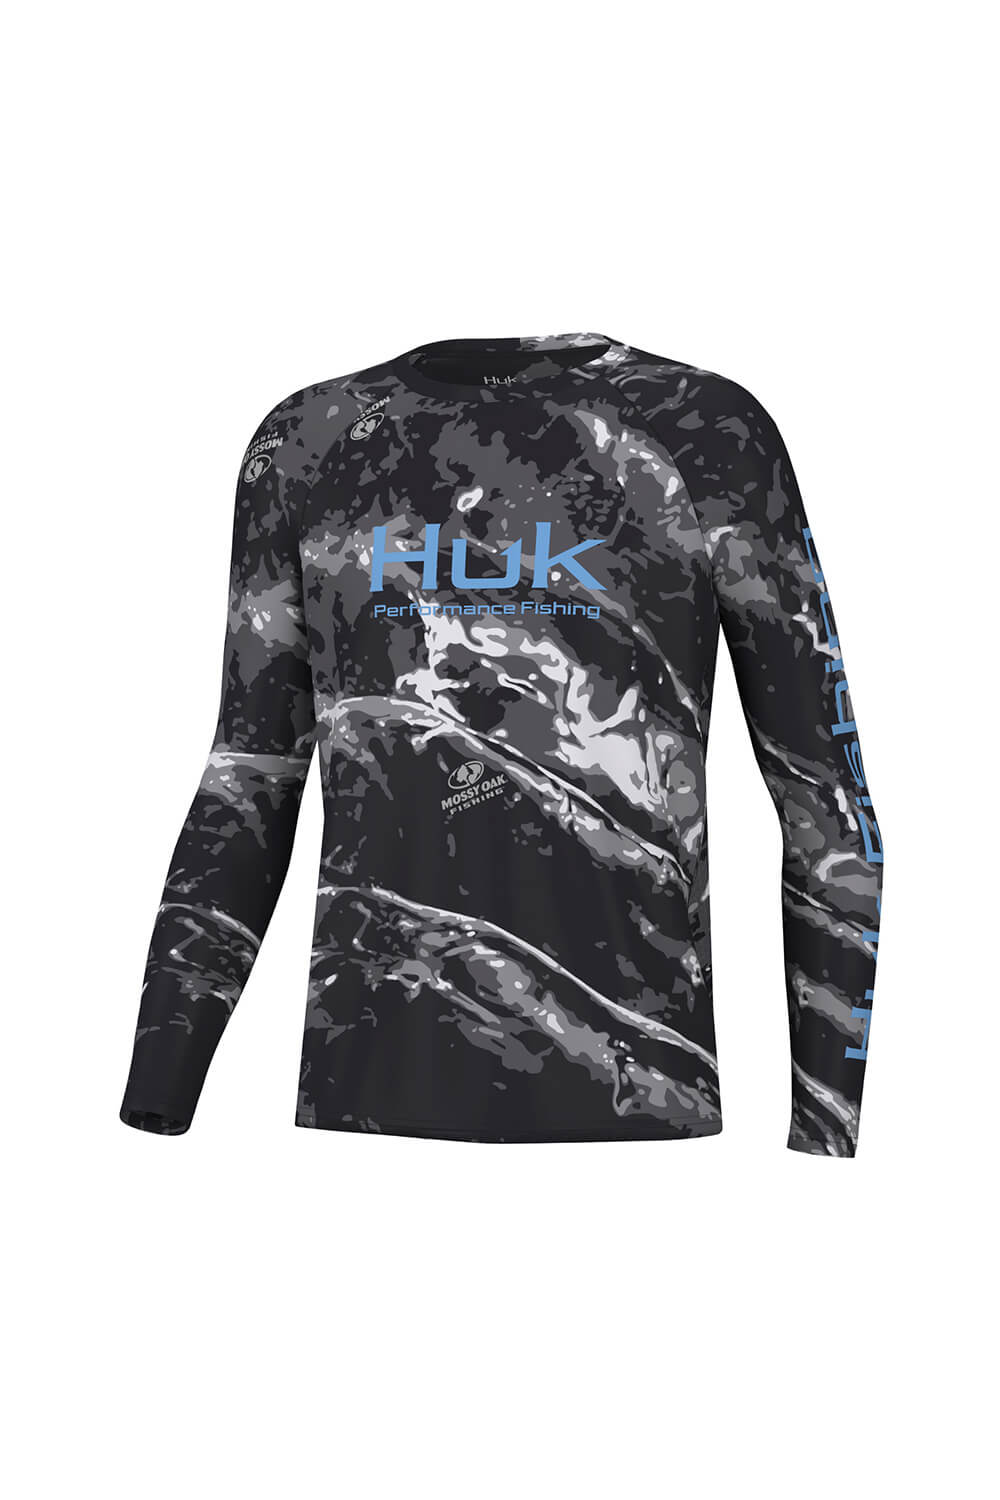 Huk Fishing Youth Pursuit Mossy Oak Crew Long Sleeve T-Shirt for Boys in  Black